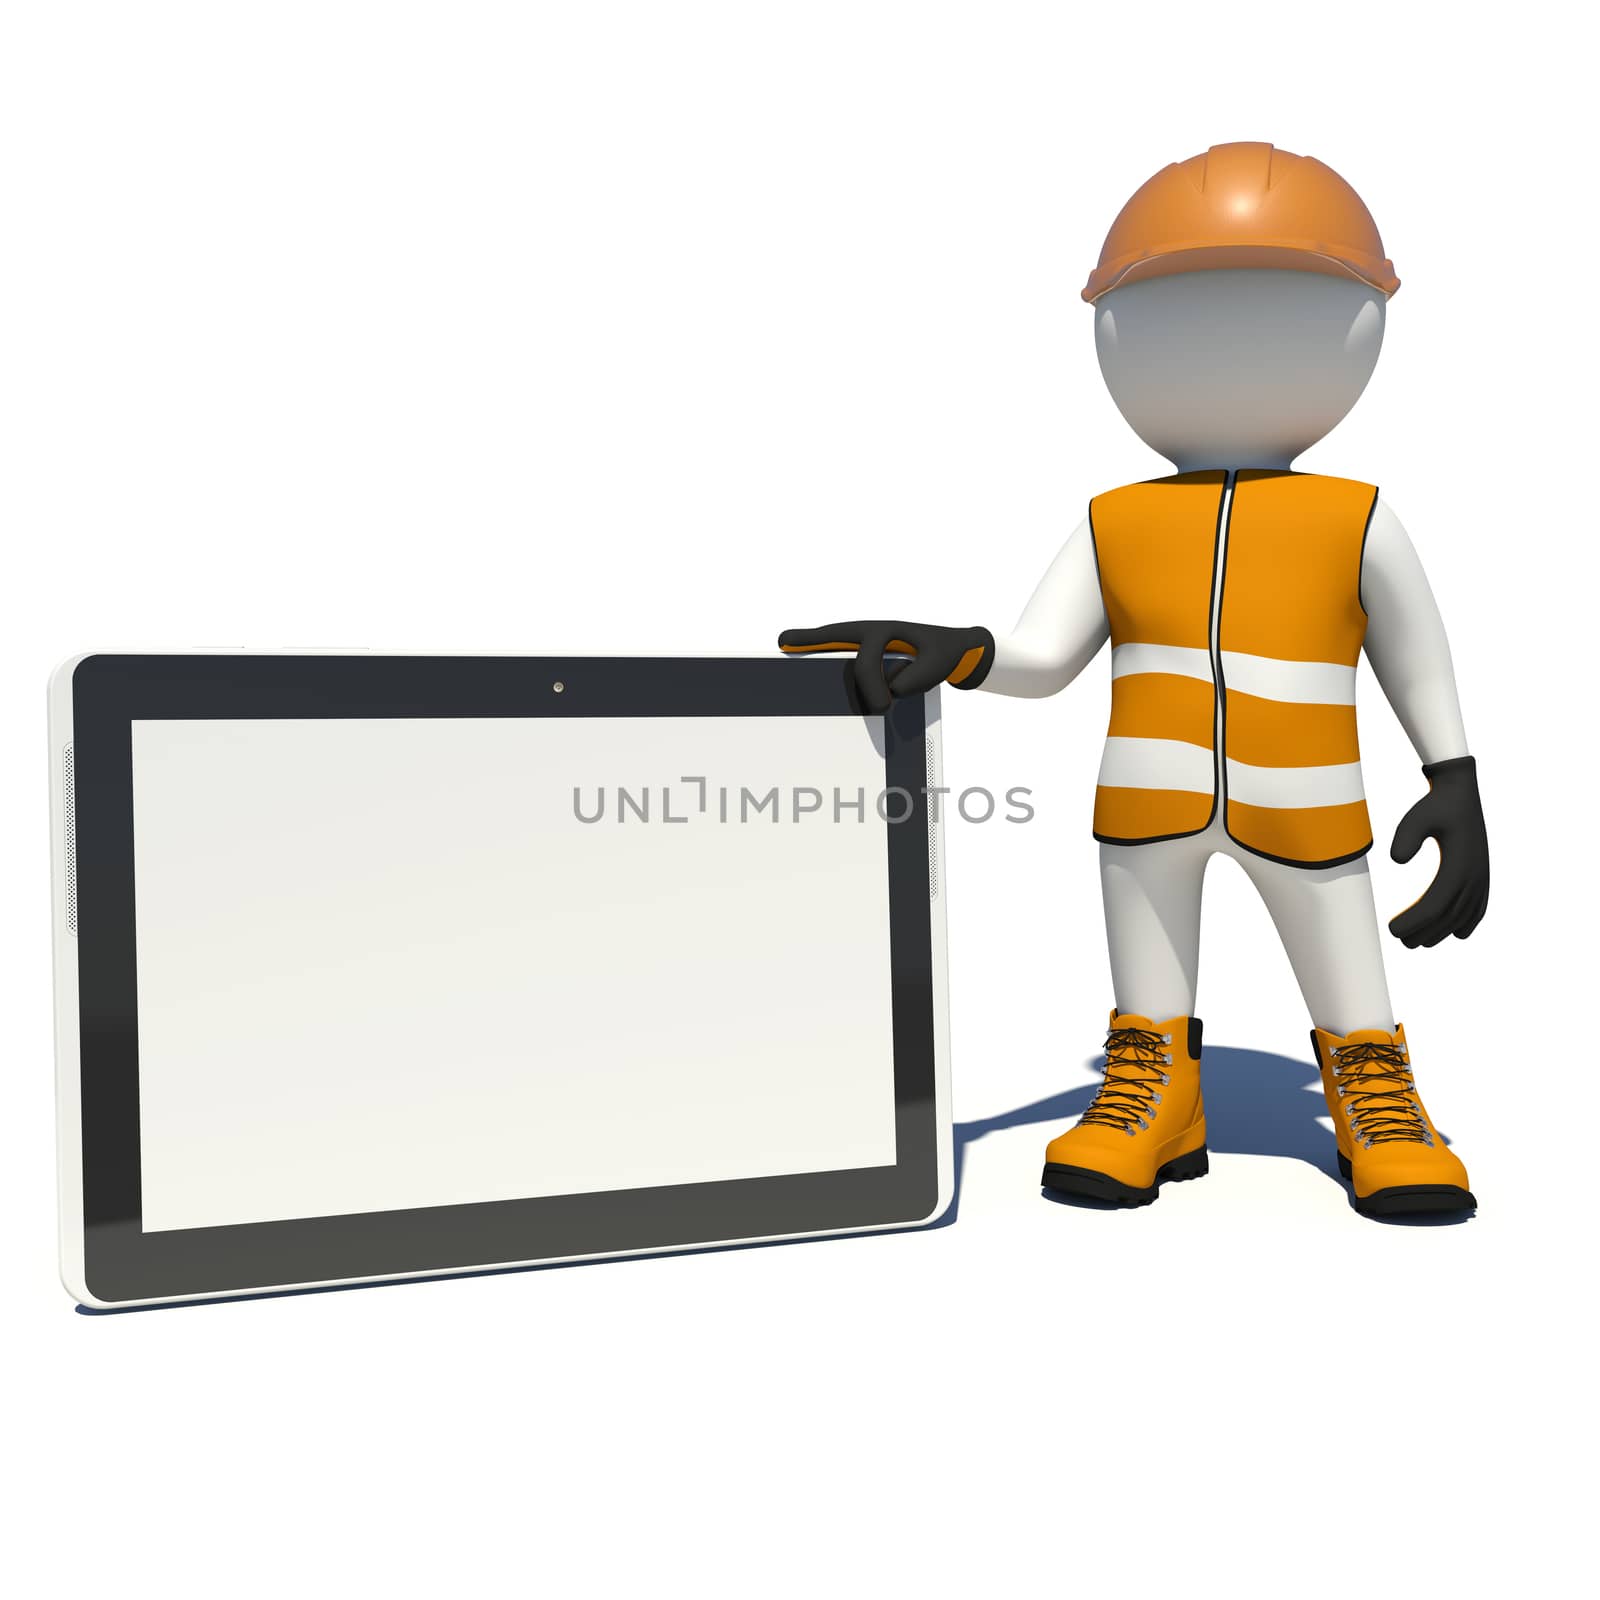 Worker in vest, shoes and helmet holding tablet pc with empty touch screen. Isolated render on white background